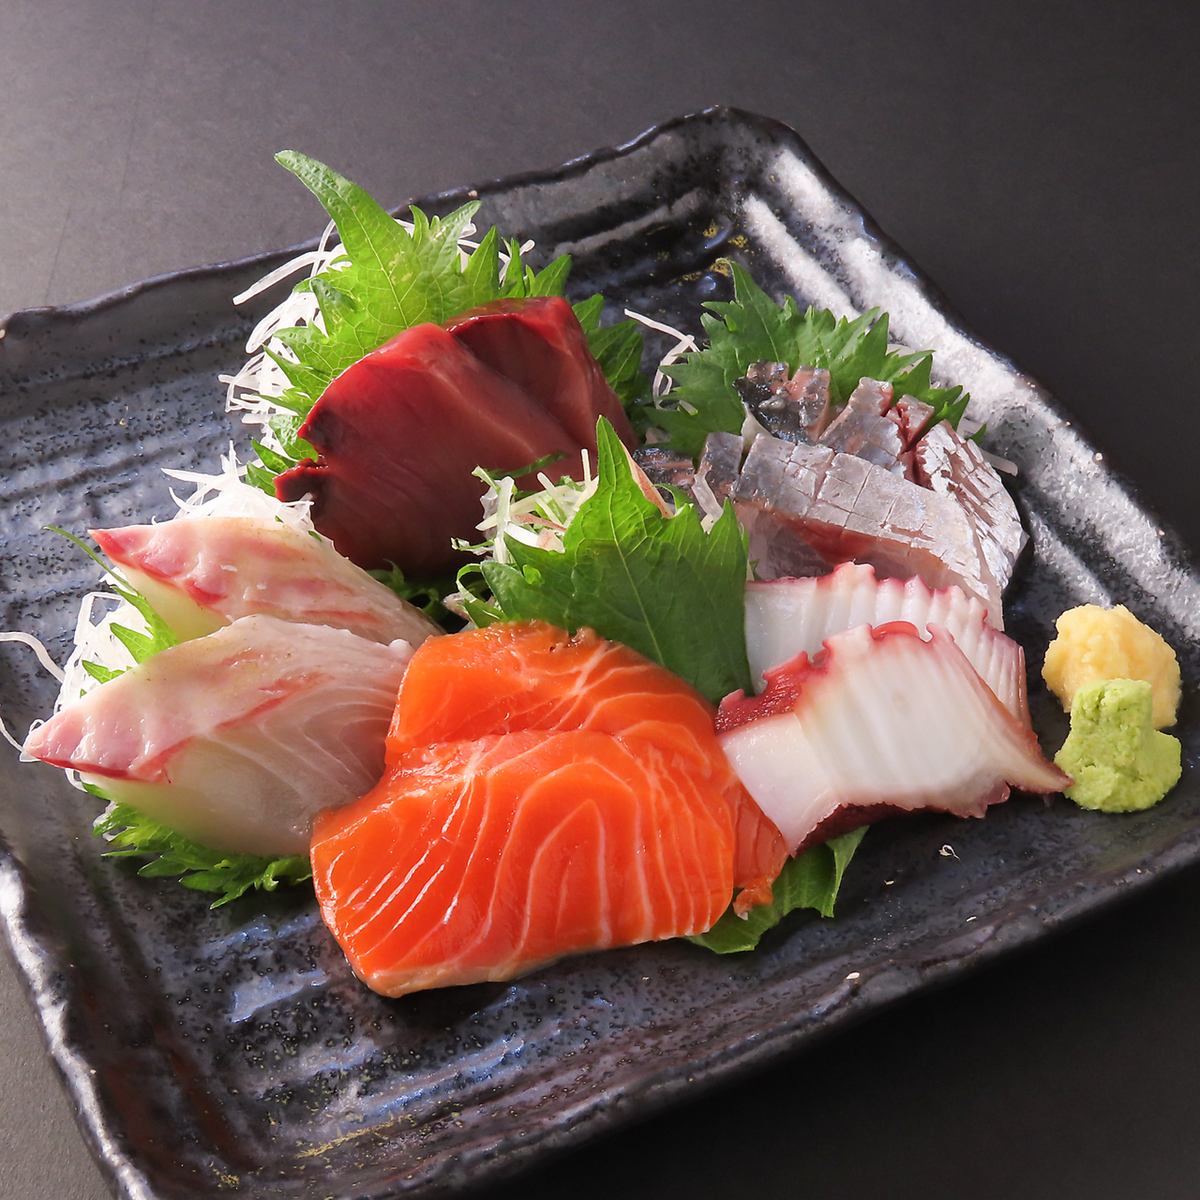 You can also enjoy super fresh seafood, which the owner himself purchases daily.